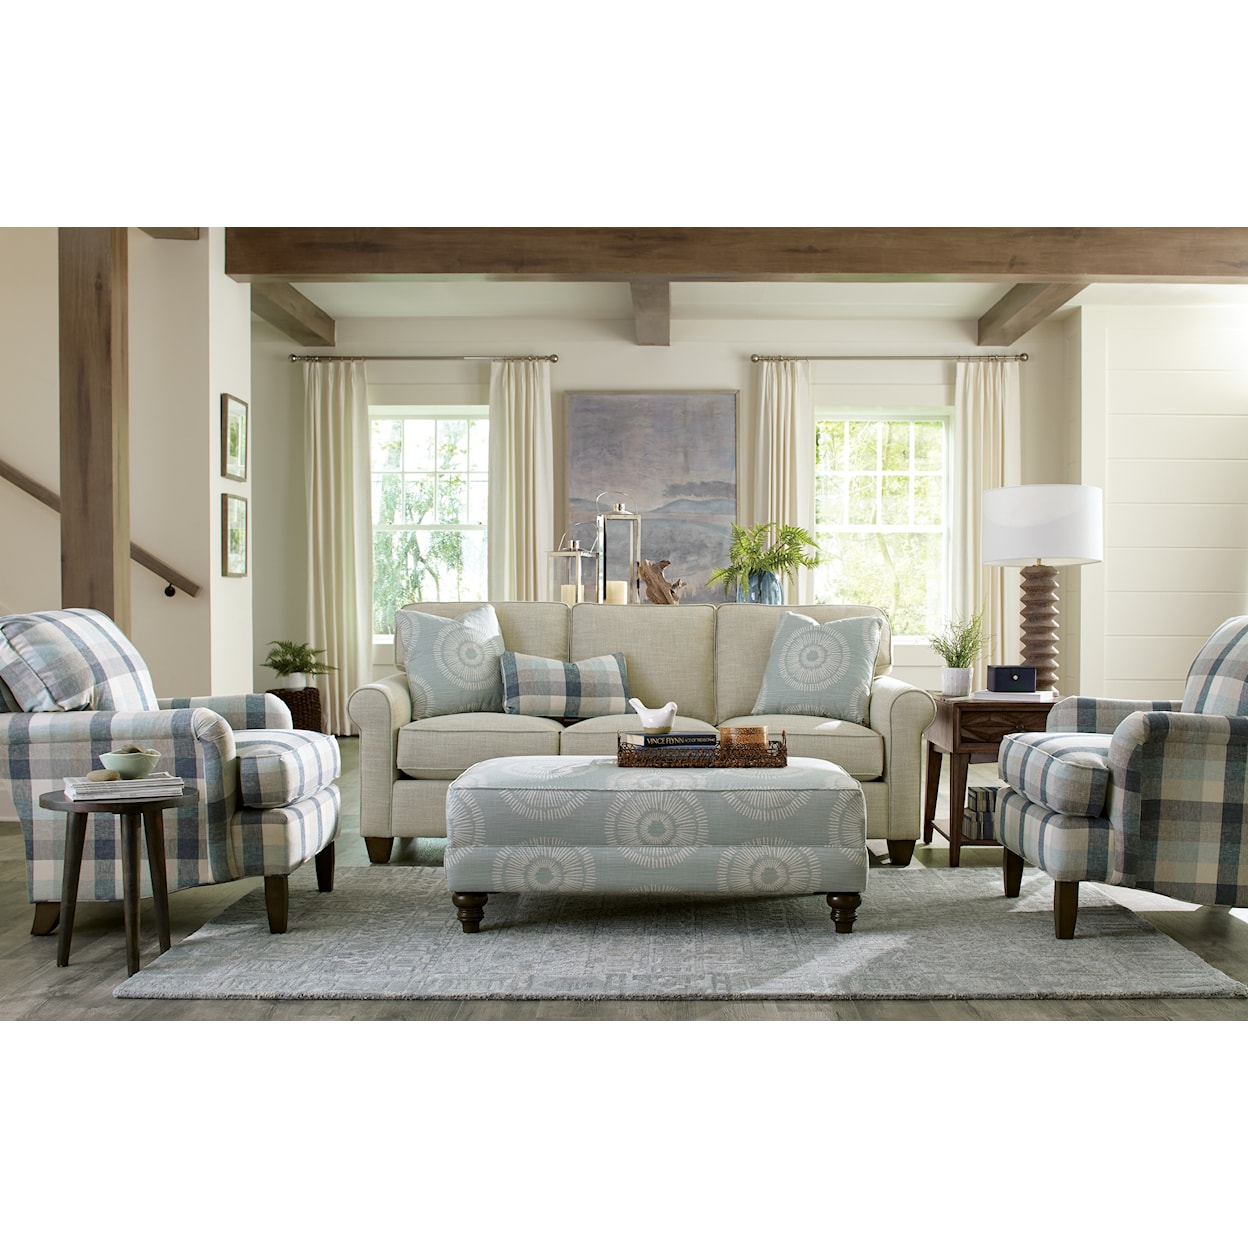 Craftmaster 717450 Sofa with Rolled Armrests